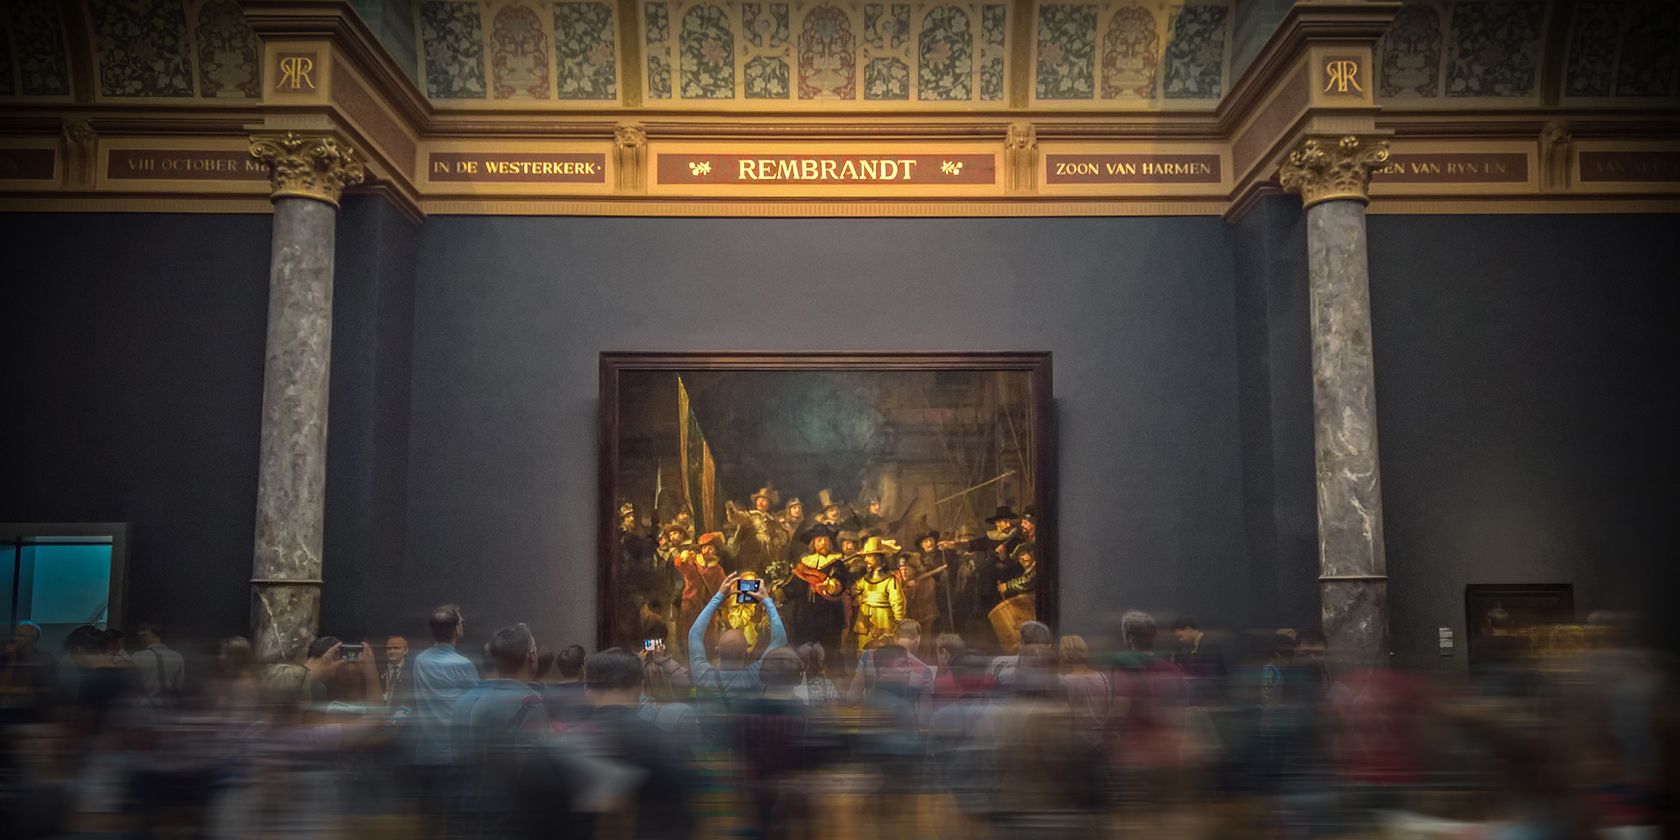 A Rembrandt painting on display in a crowded museum.